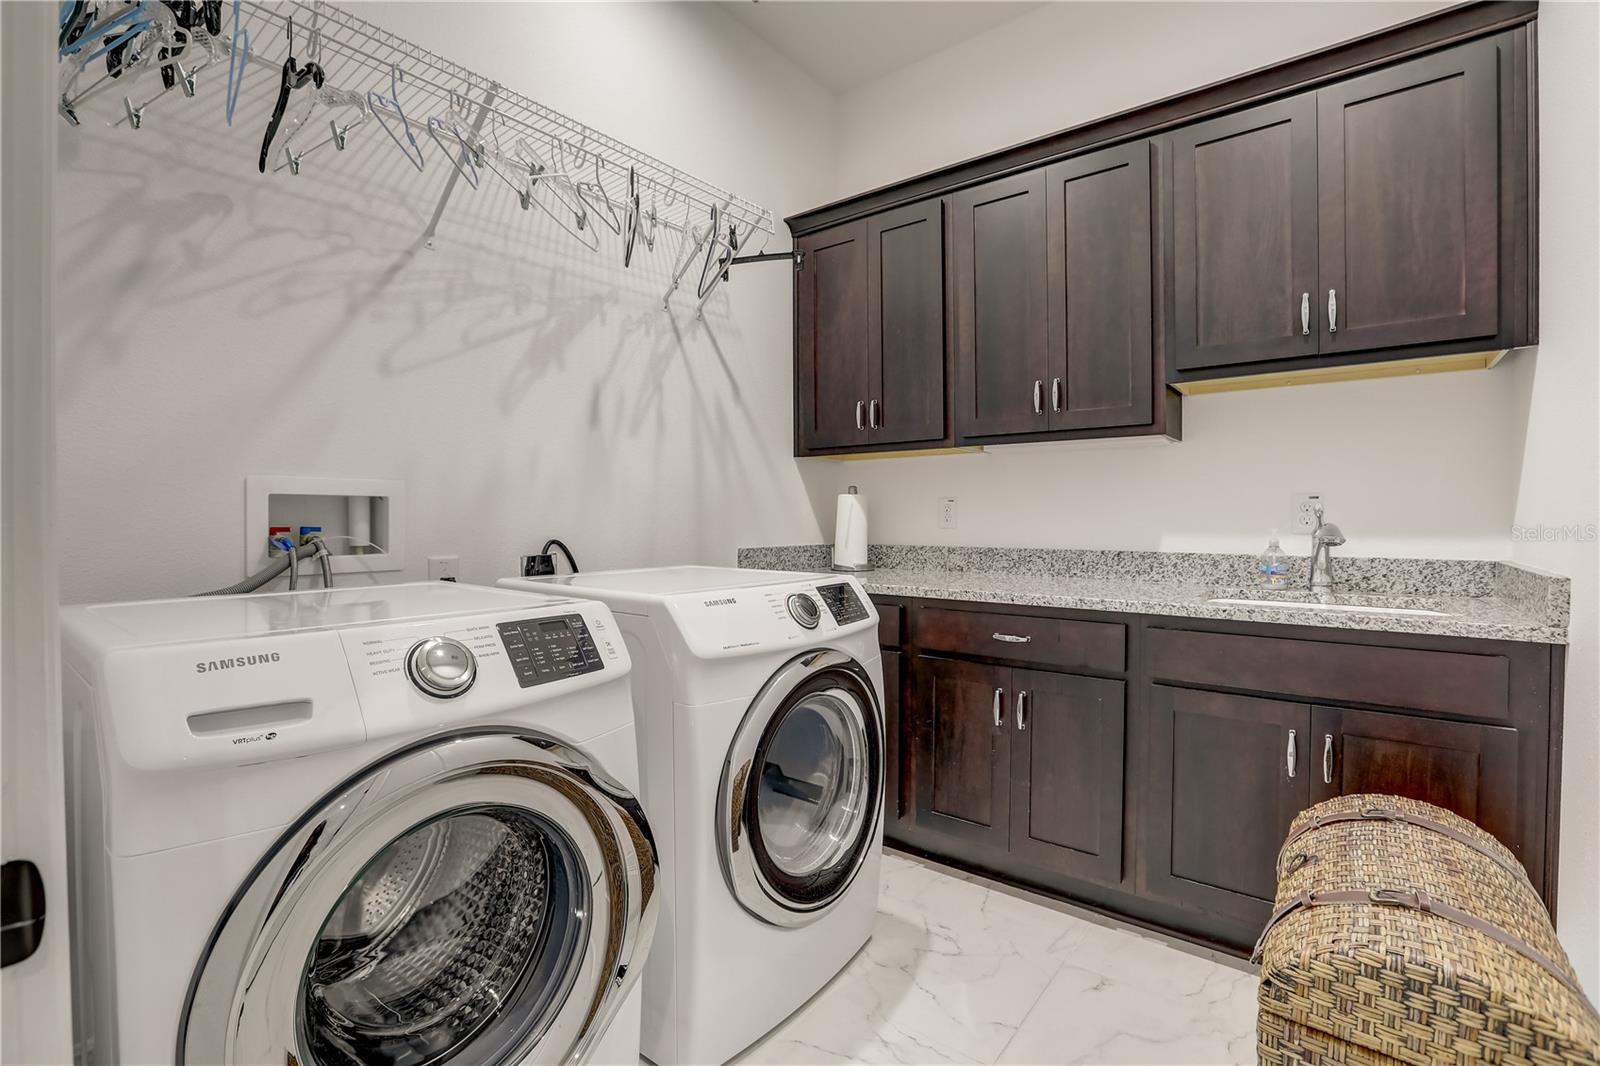 Large laundry room with sink, cabinets and hanging shelf rack